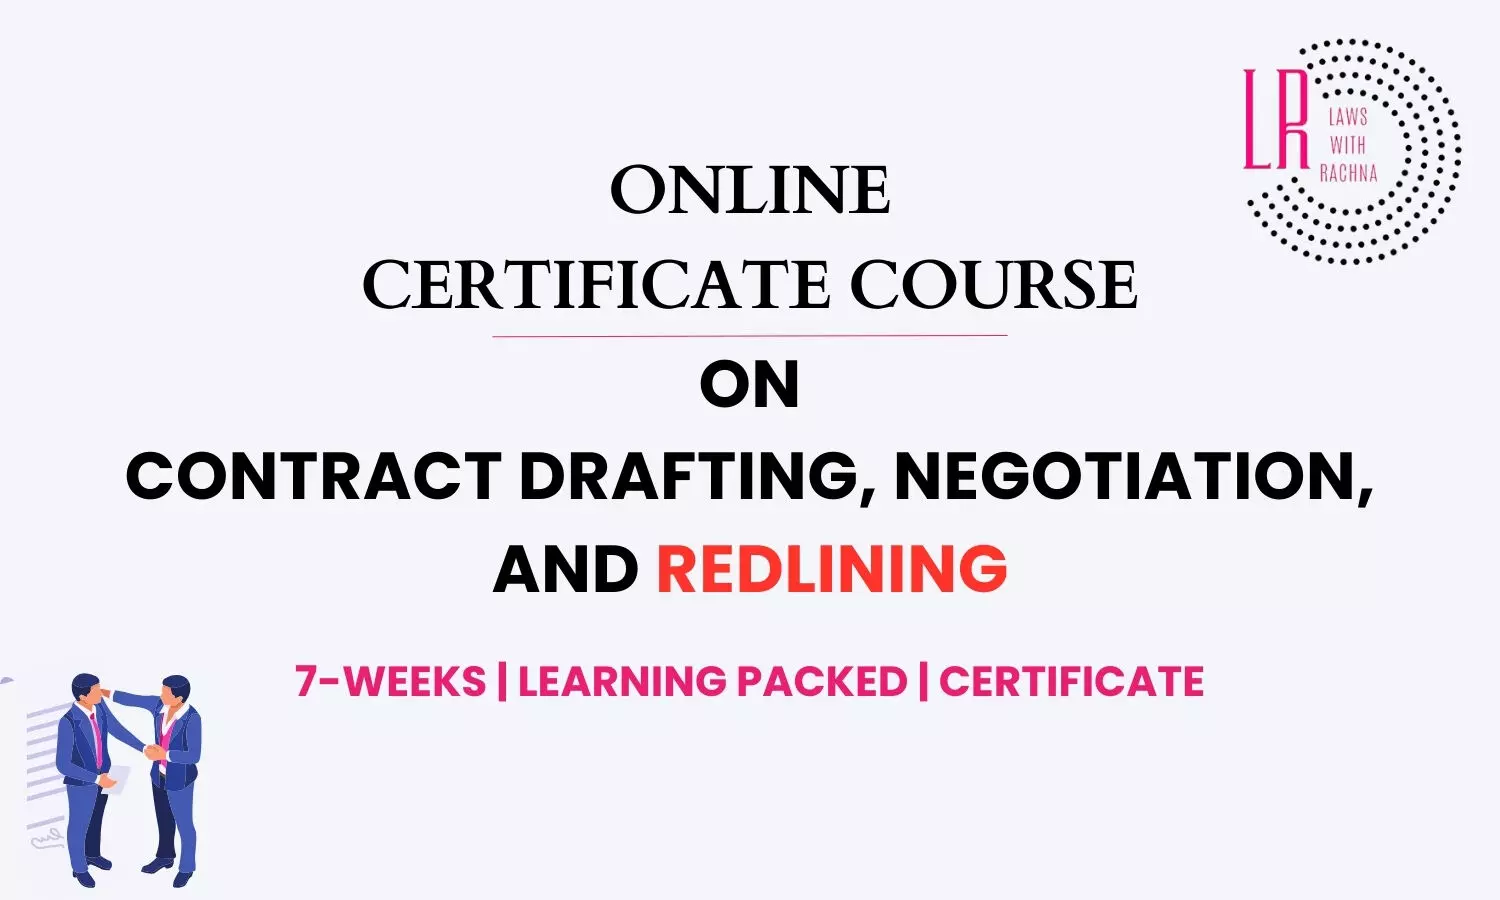 Certificate Course on Contract Drafting, Negotiation, and Redlining  LawswithRachna